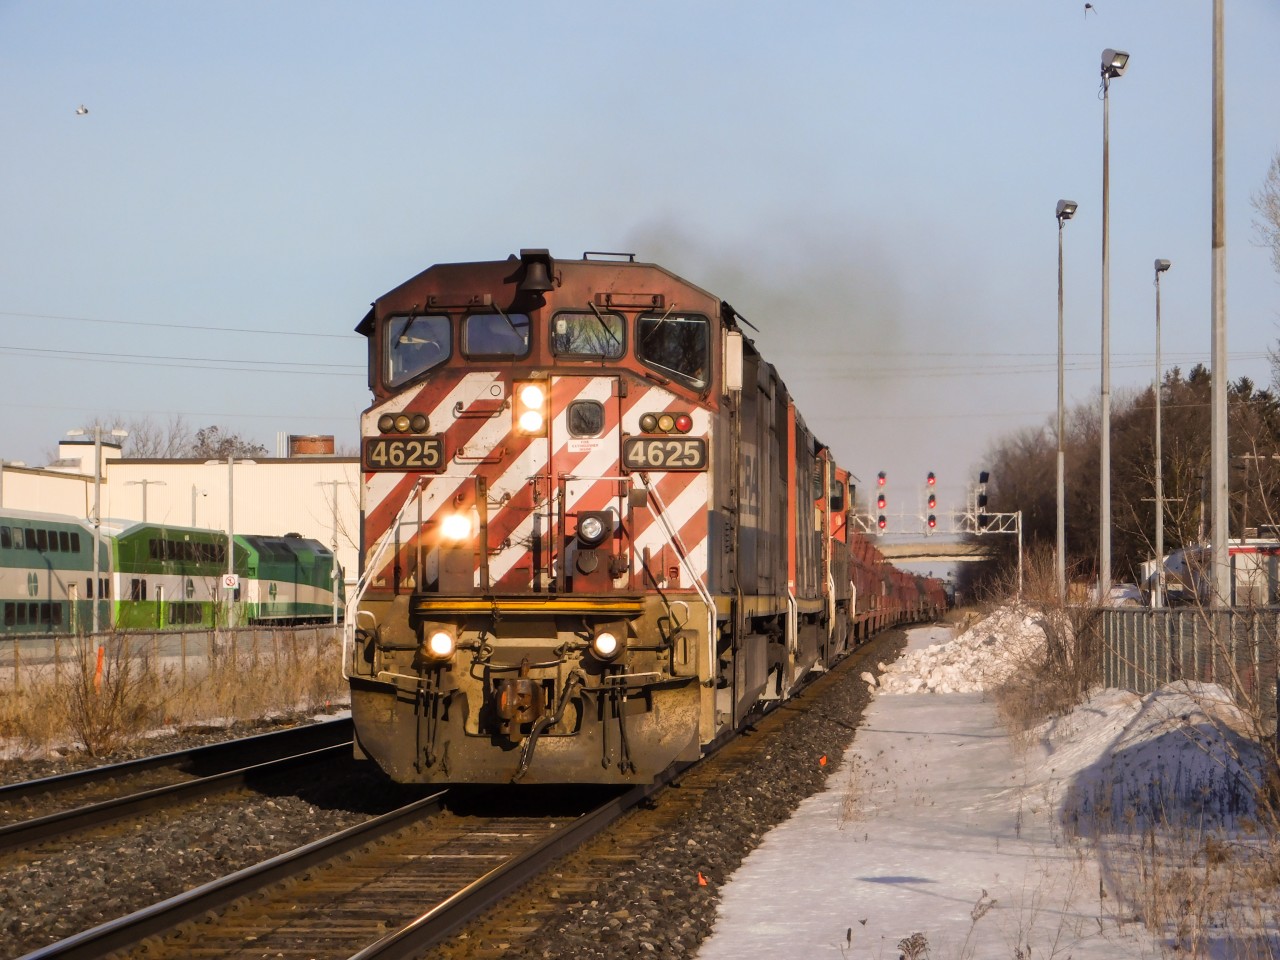 At the time of posting this, the infamous season of Winter is just around the corner, scenes like this will be possible again! On a bright and sunny February day, CN Macmillan Yard - Aldershot Yard turn L570 charges through Georgetown with a pleasant BC Rail (or, BCOL) GE C40-8M in the lead, this unit was built for the British Columbia Railway in 1993 out of General Electric's Erie, PA locomotive plant. One could wish for the unit to have a cleaner nose, but you take what ya get! This unit is still active on CN's roster.